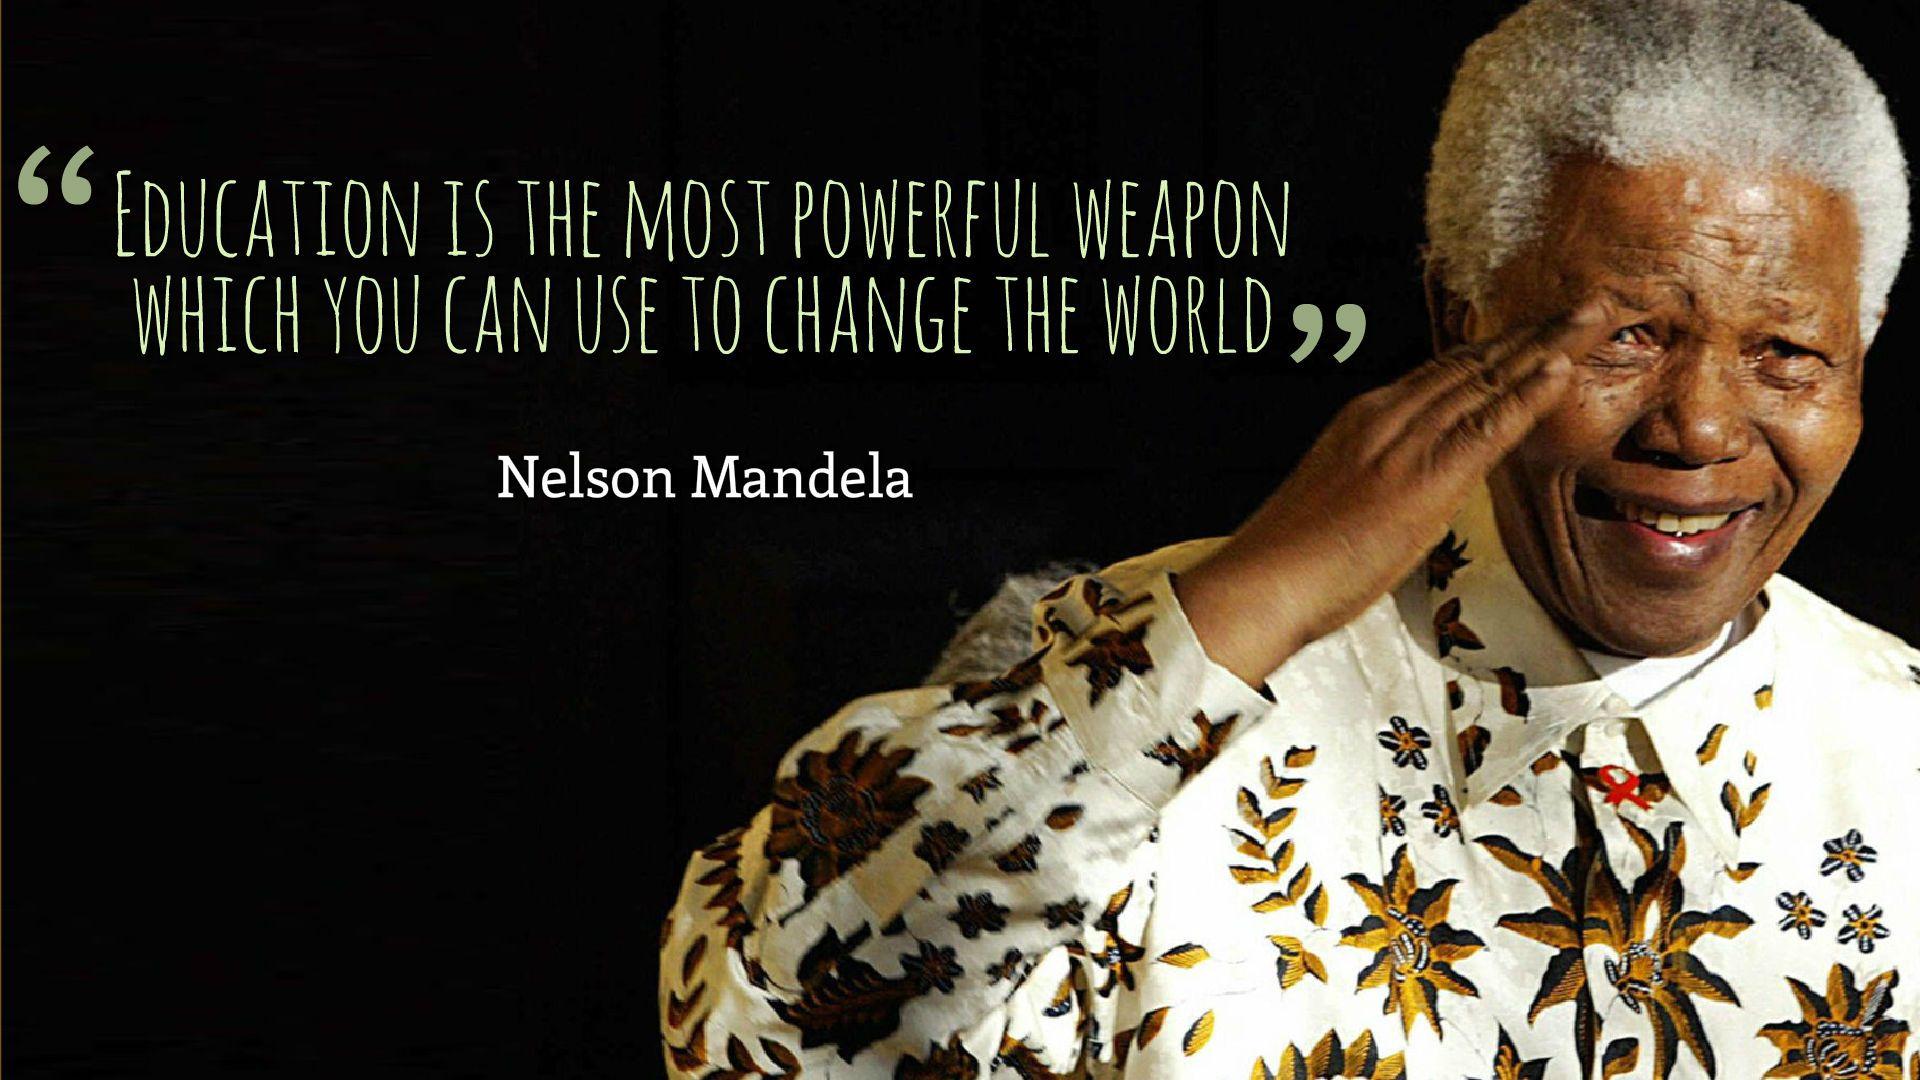 Nelson Mandela Education Most Powerful Weapon Quotes Wallpaper 10814